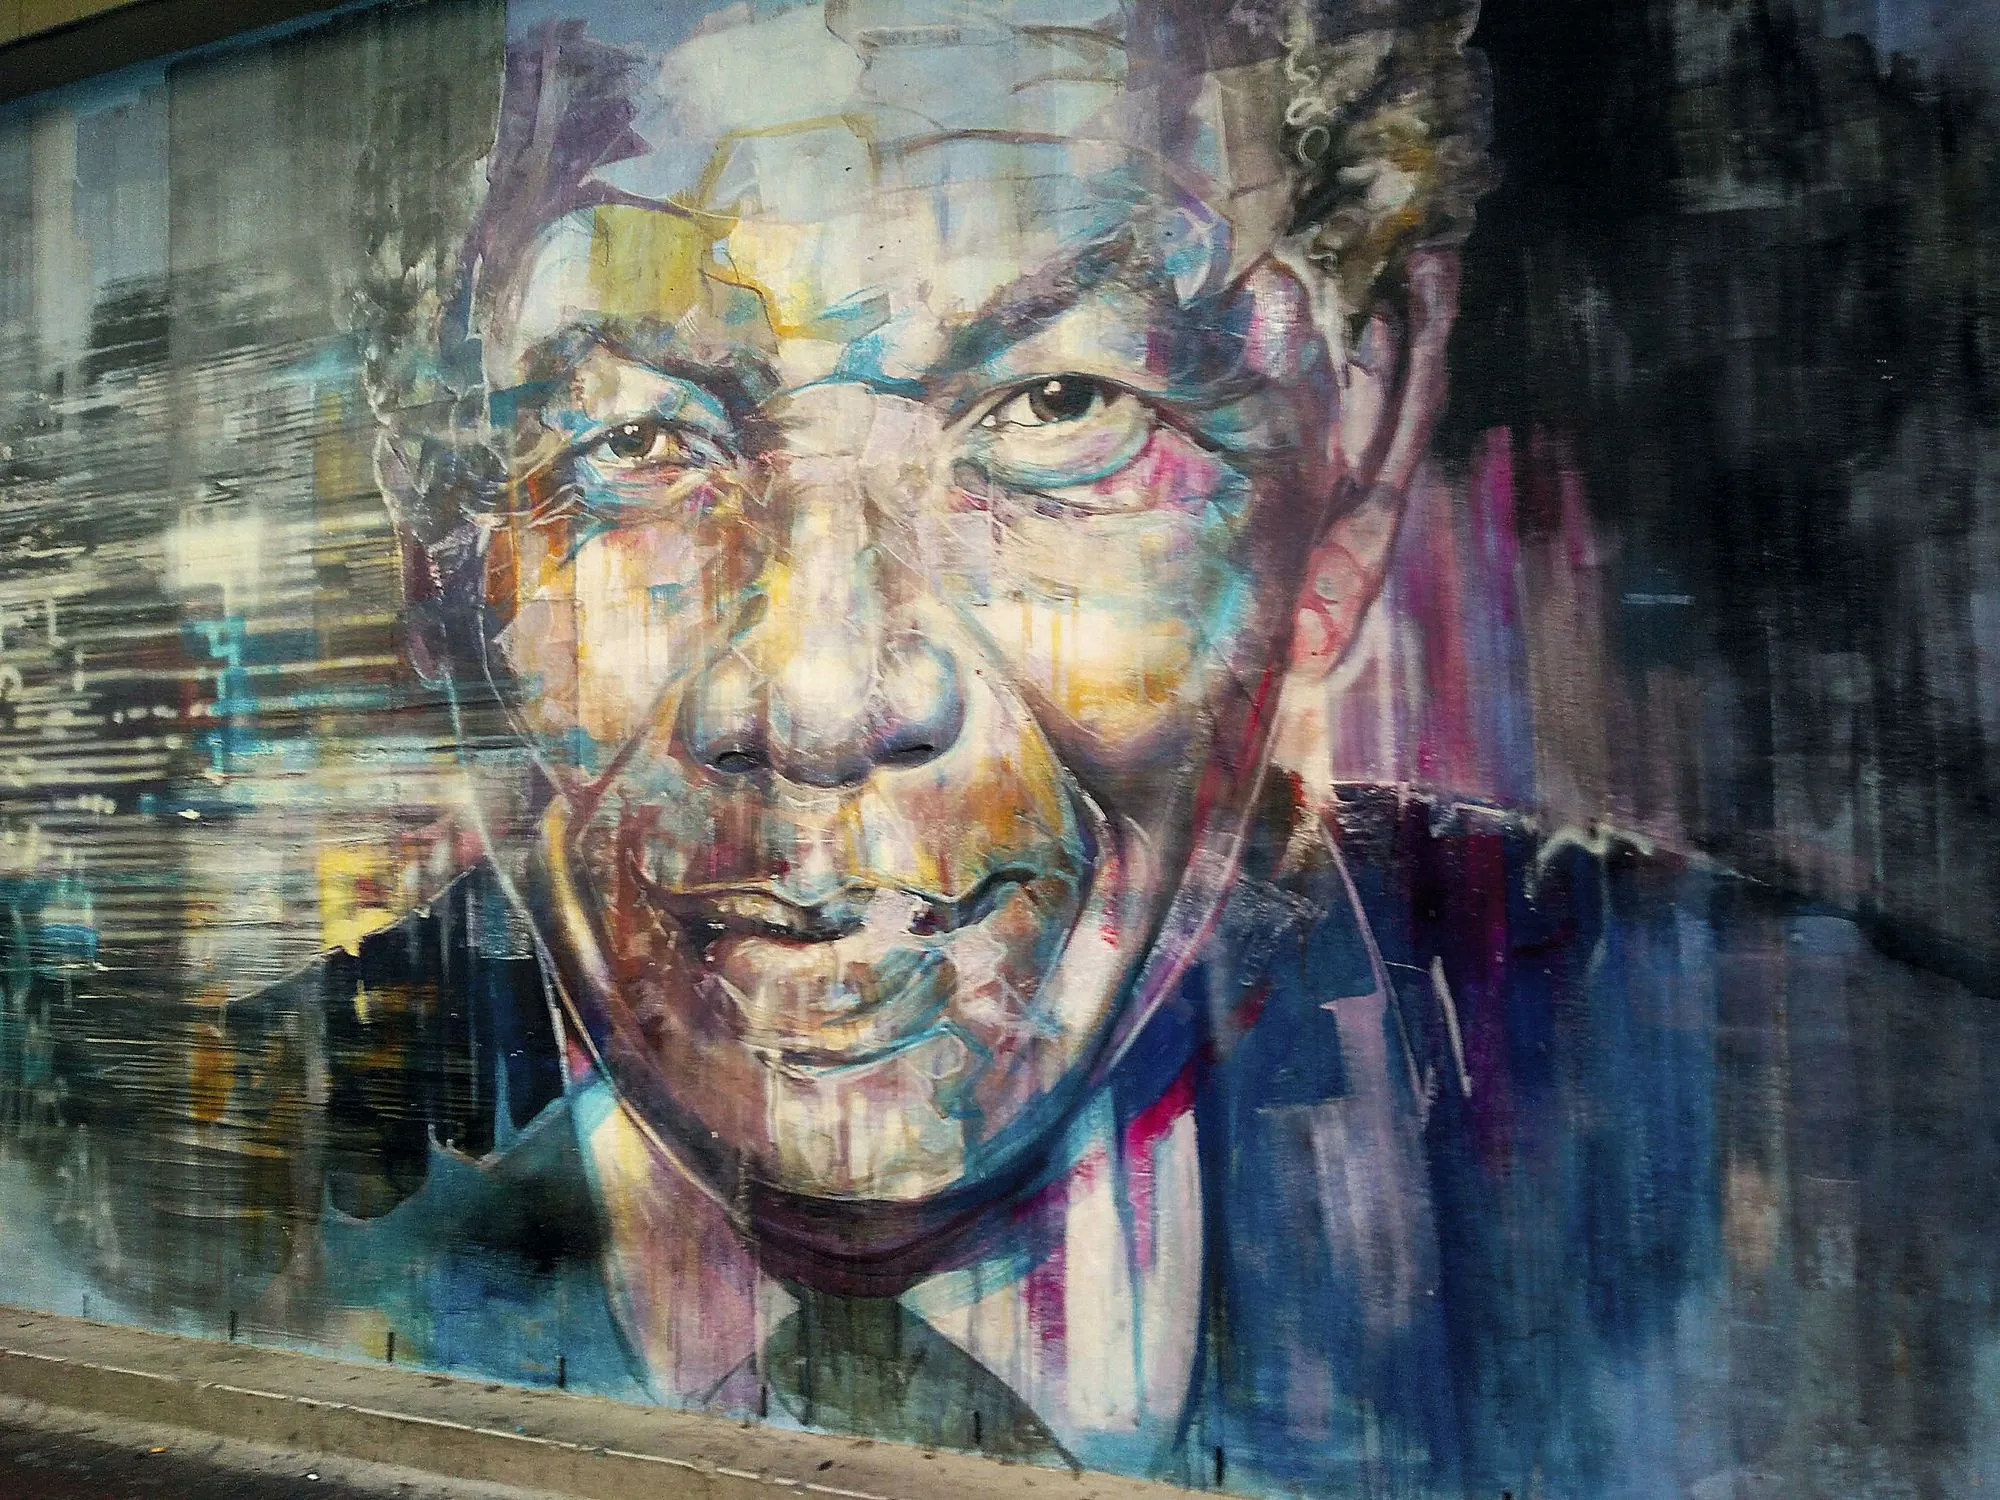 A mural paying tribute to Nelson Mandela, 2018.